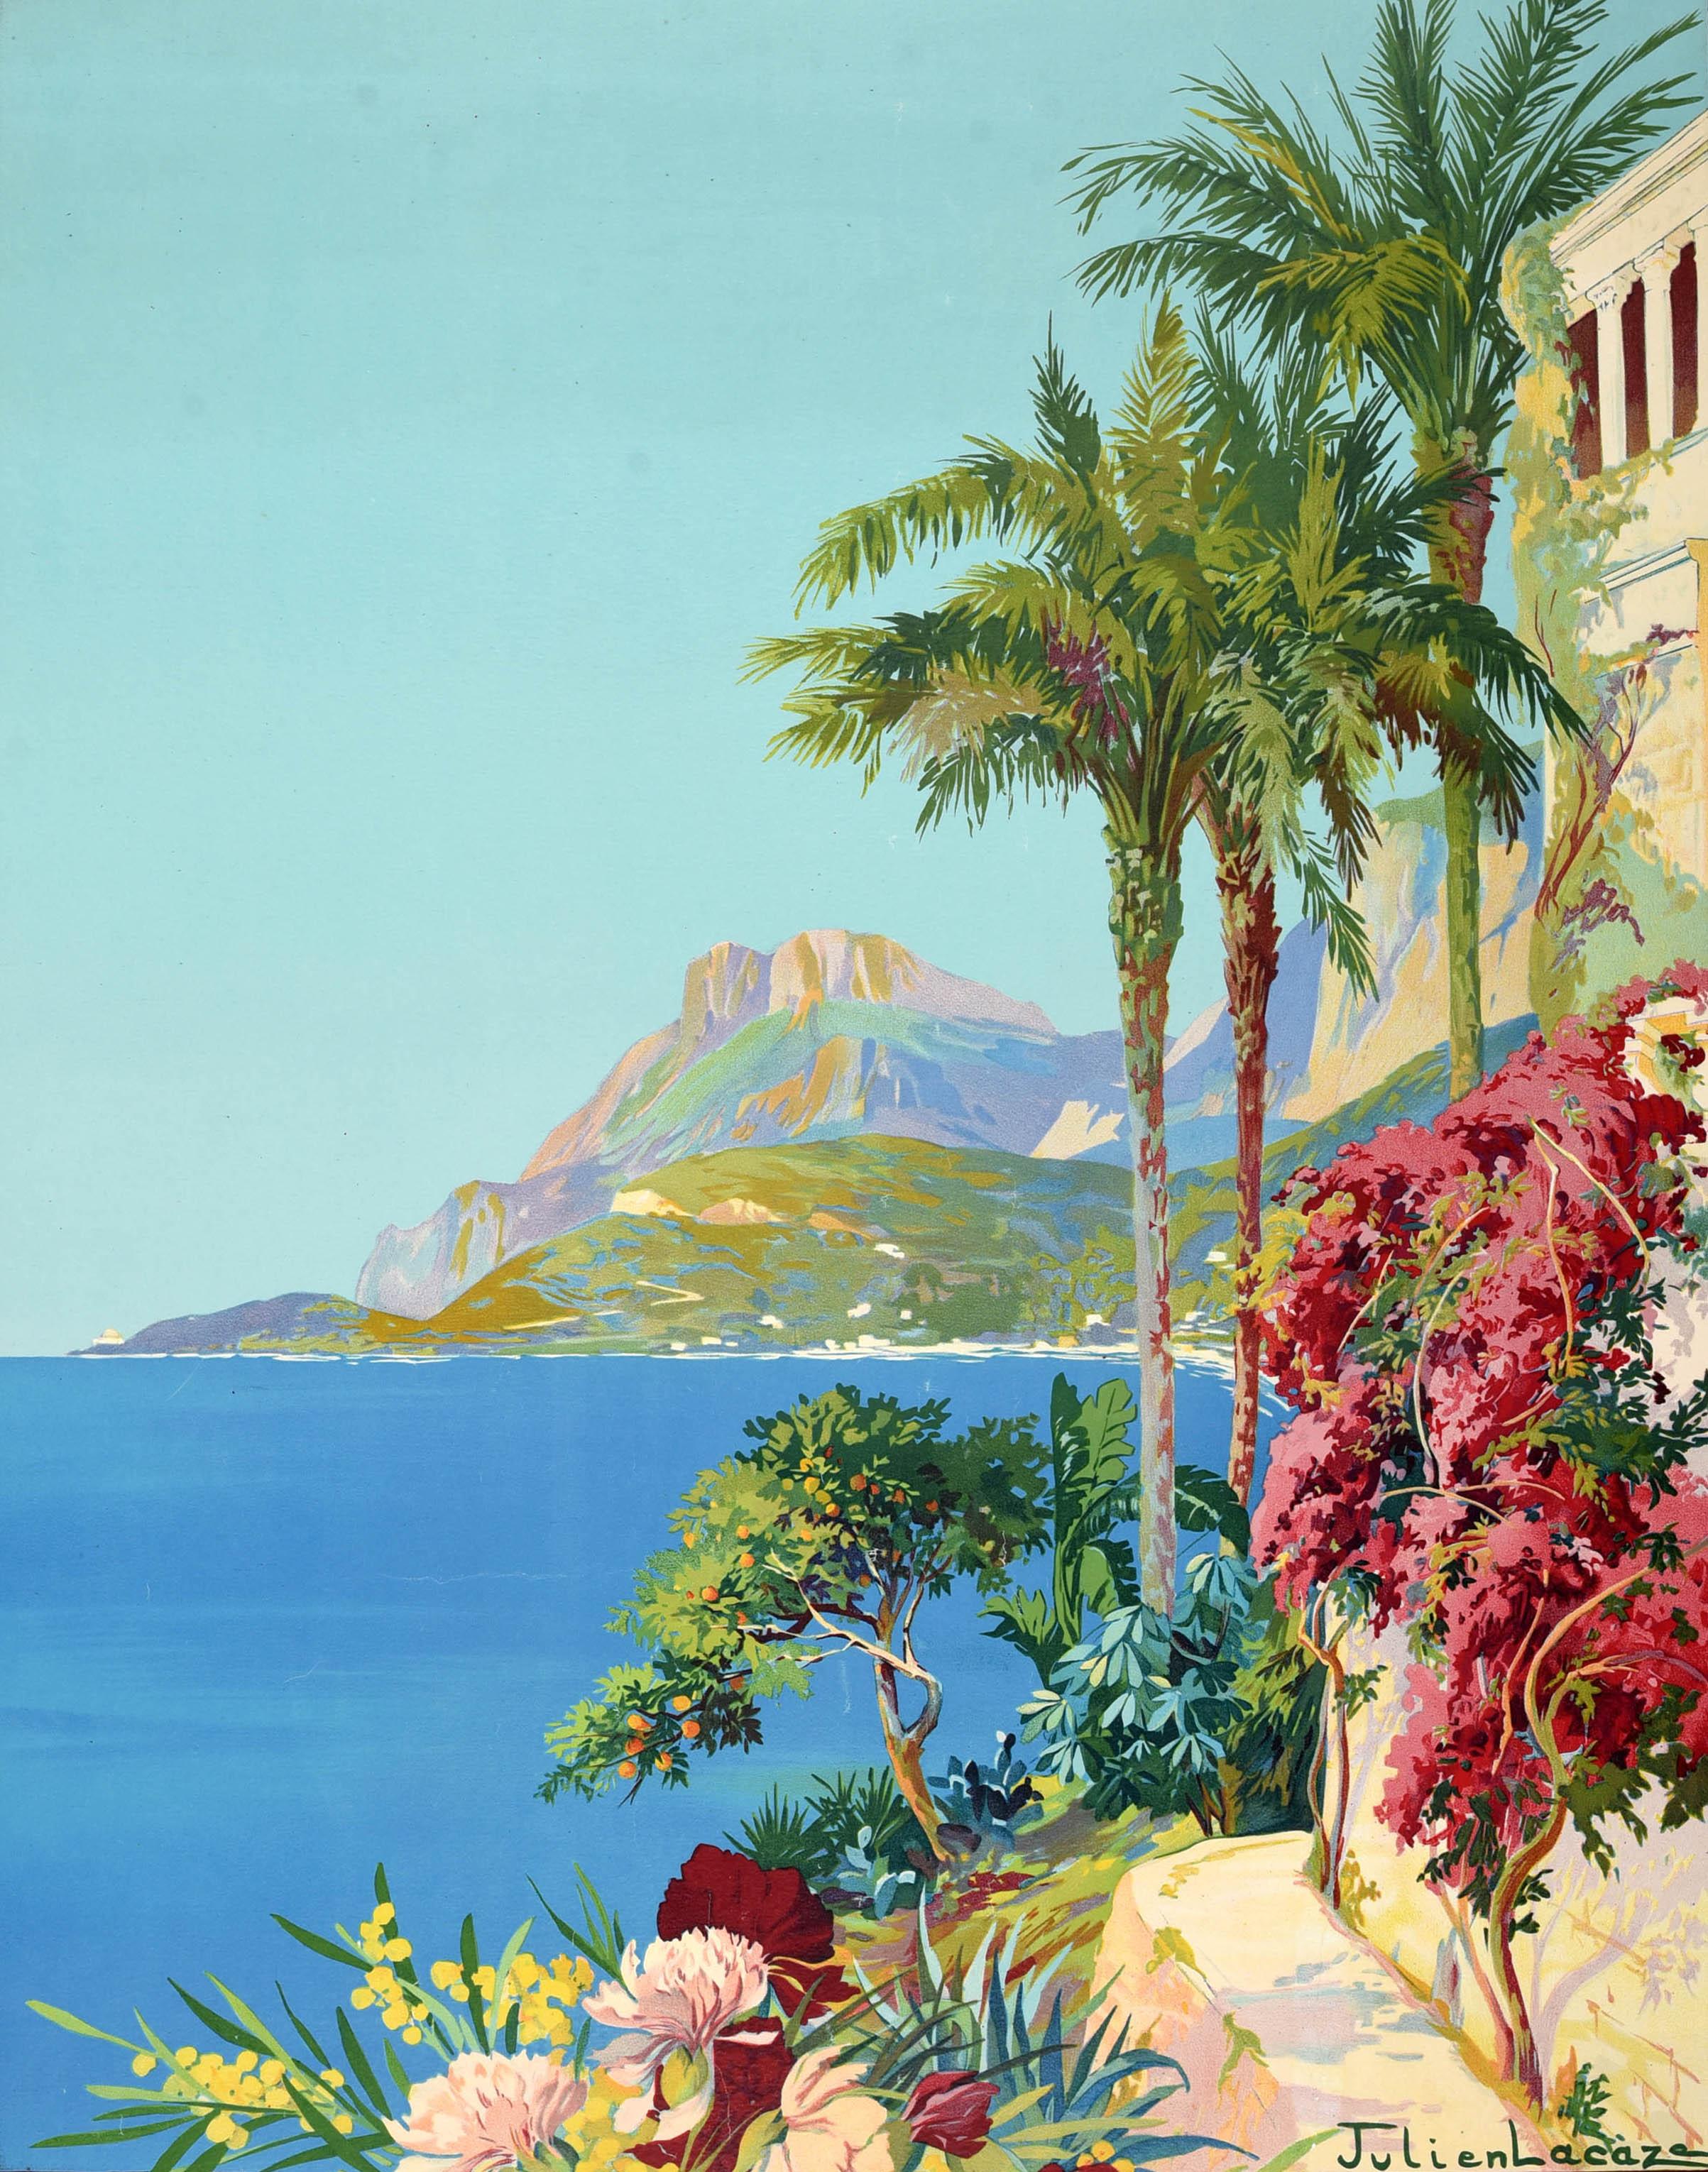 Original antique travel poster for La Cote D'Azur & Le Cap Martin issued by the PLM Paris Lyon Mediterranee Railway featuring a scenic coastal view by the landscape artist Julien Lacaze (1886-1971) depicting the French Riviera with colourful flowers